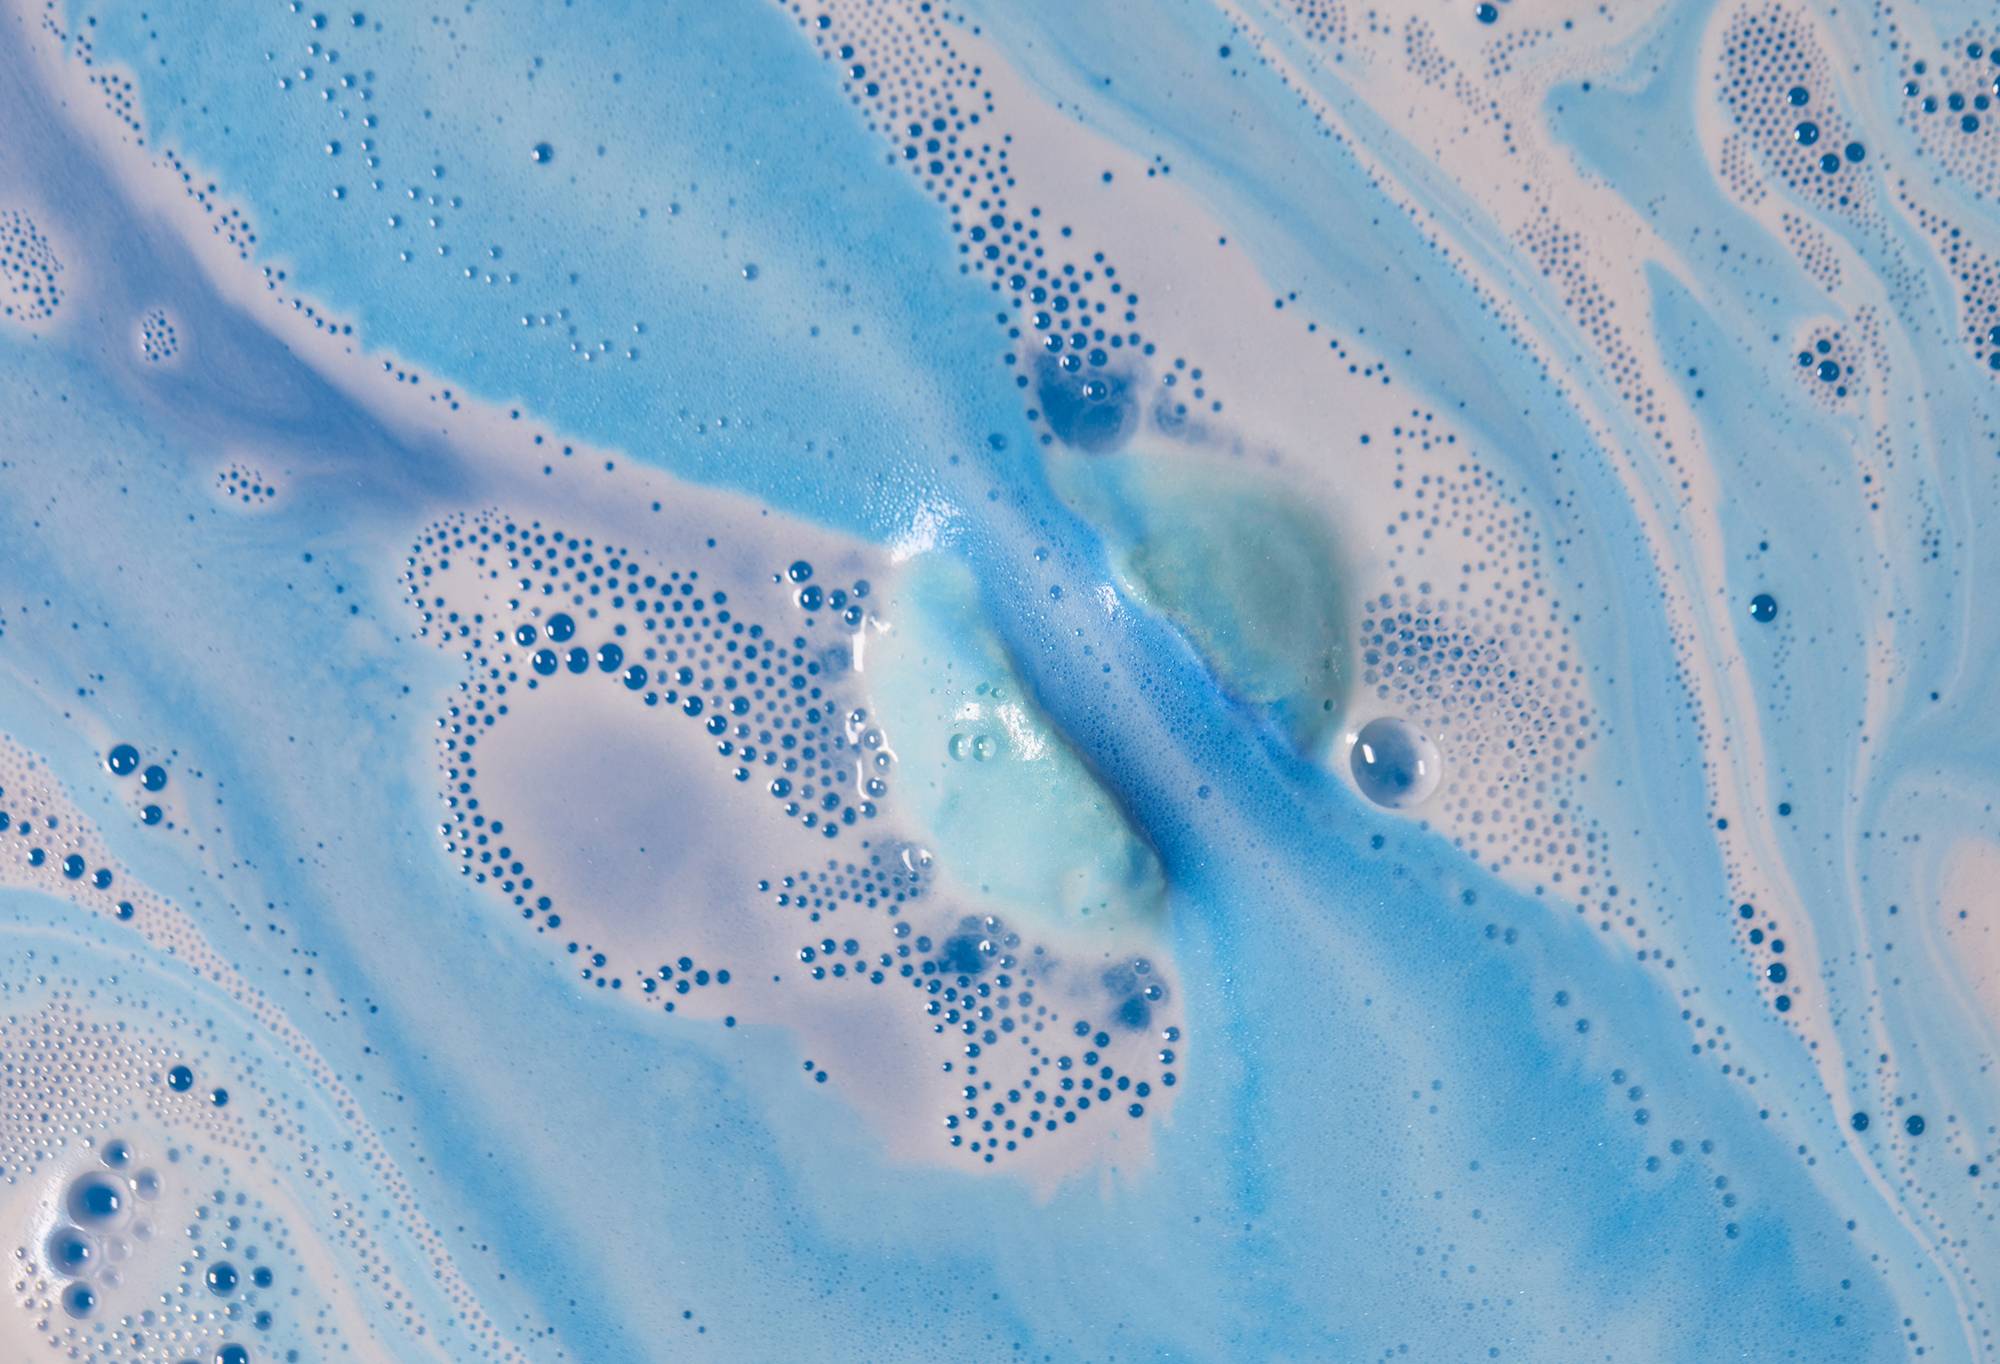 Snowdrift bath bomb fizzes away leaving magical, icy swirls of blue and white foam.